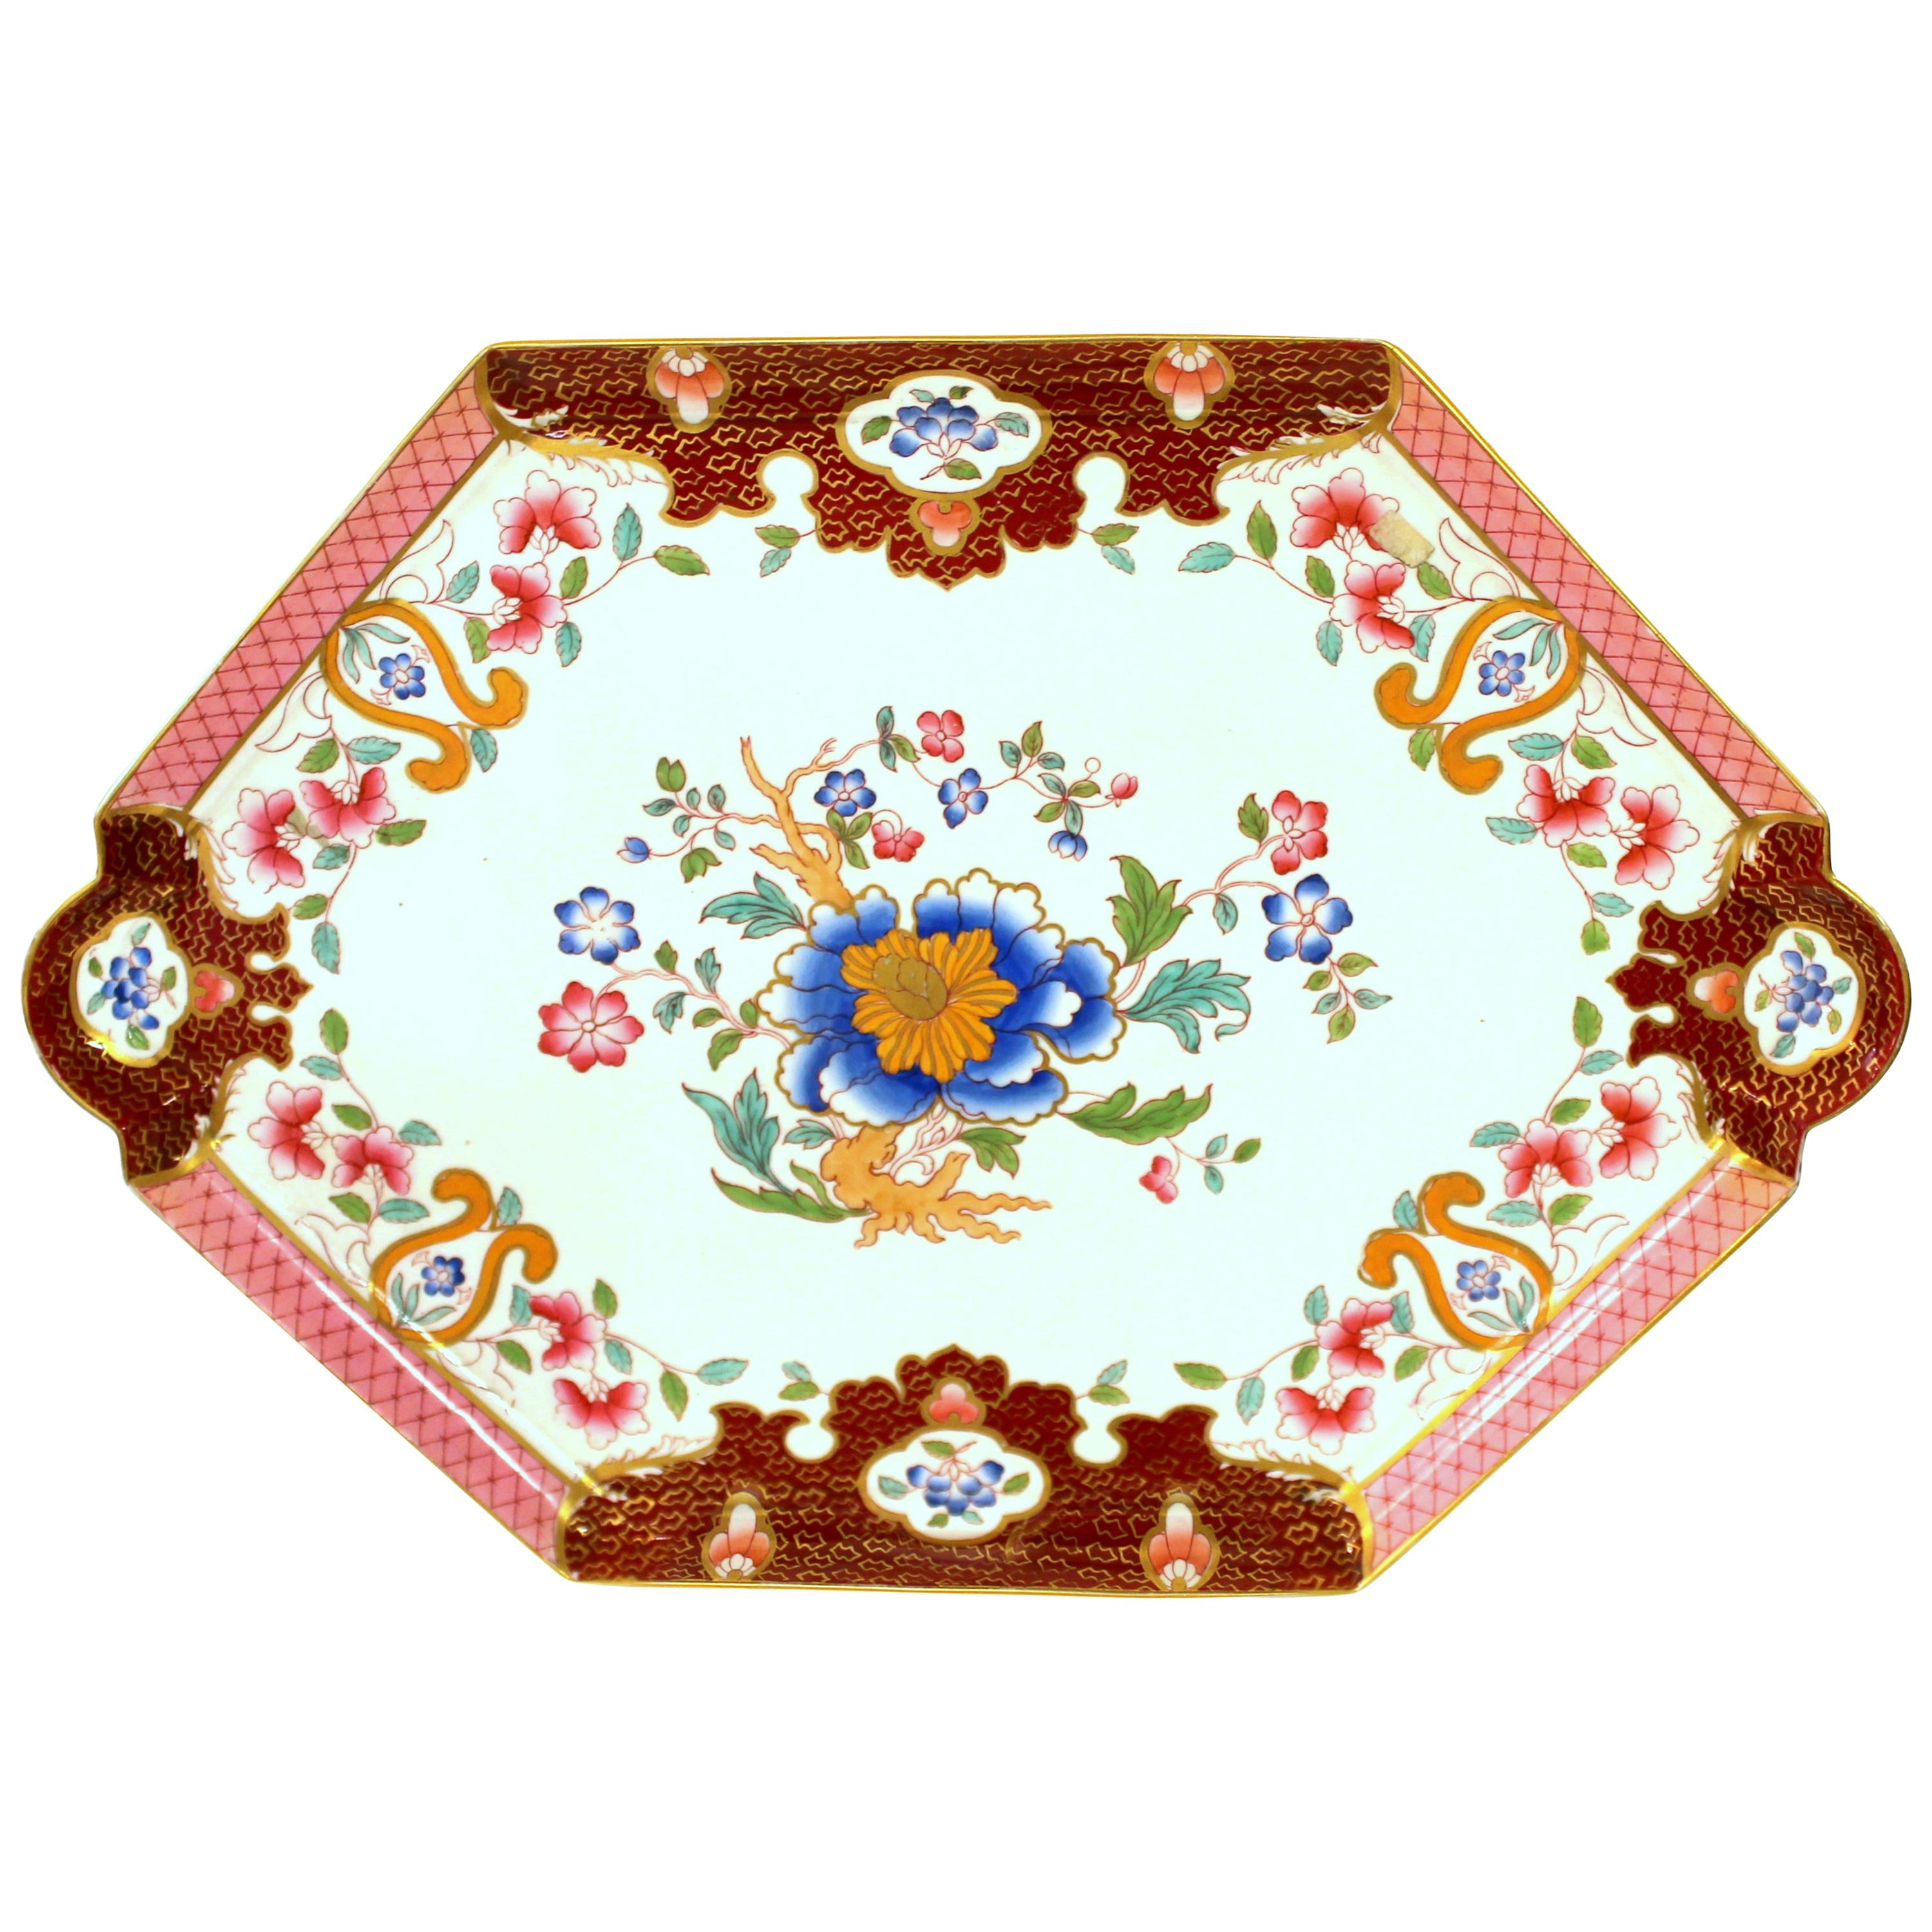 Antique English Brownfield's Hand Painted Porcelain Cabaret Tray, October 1883